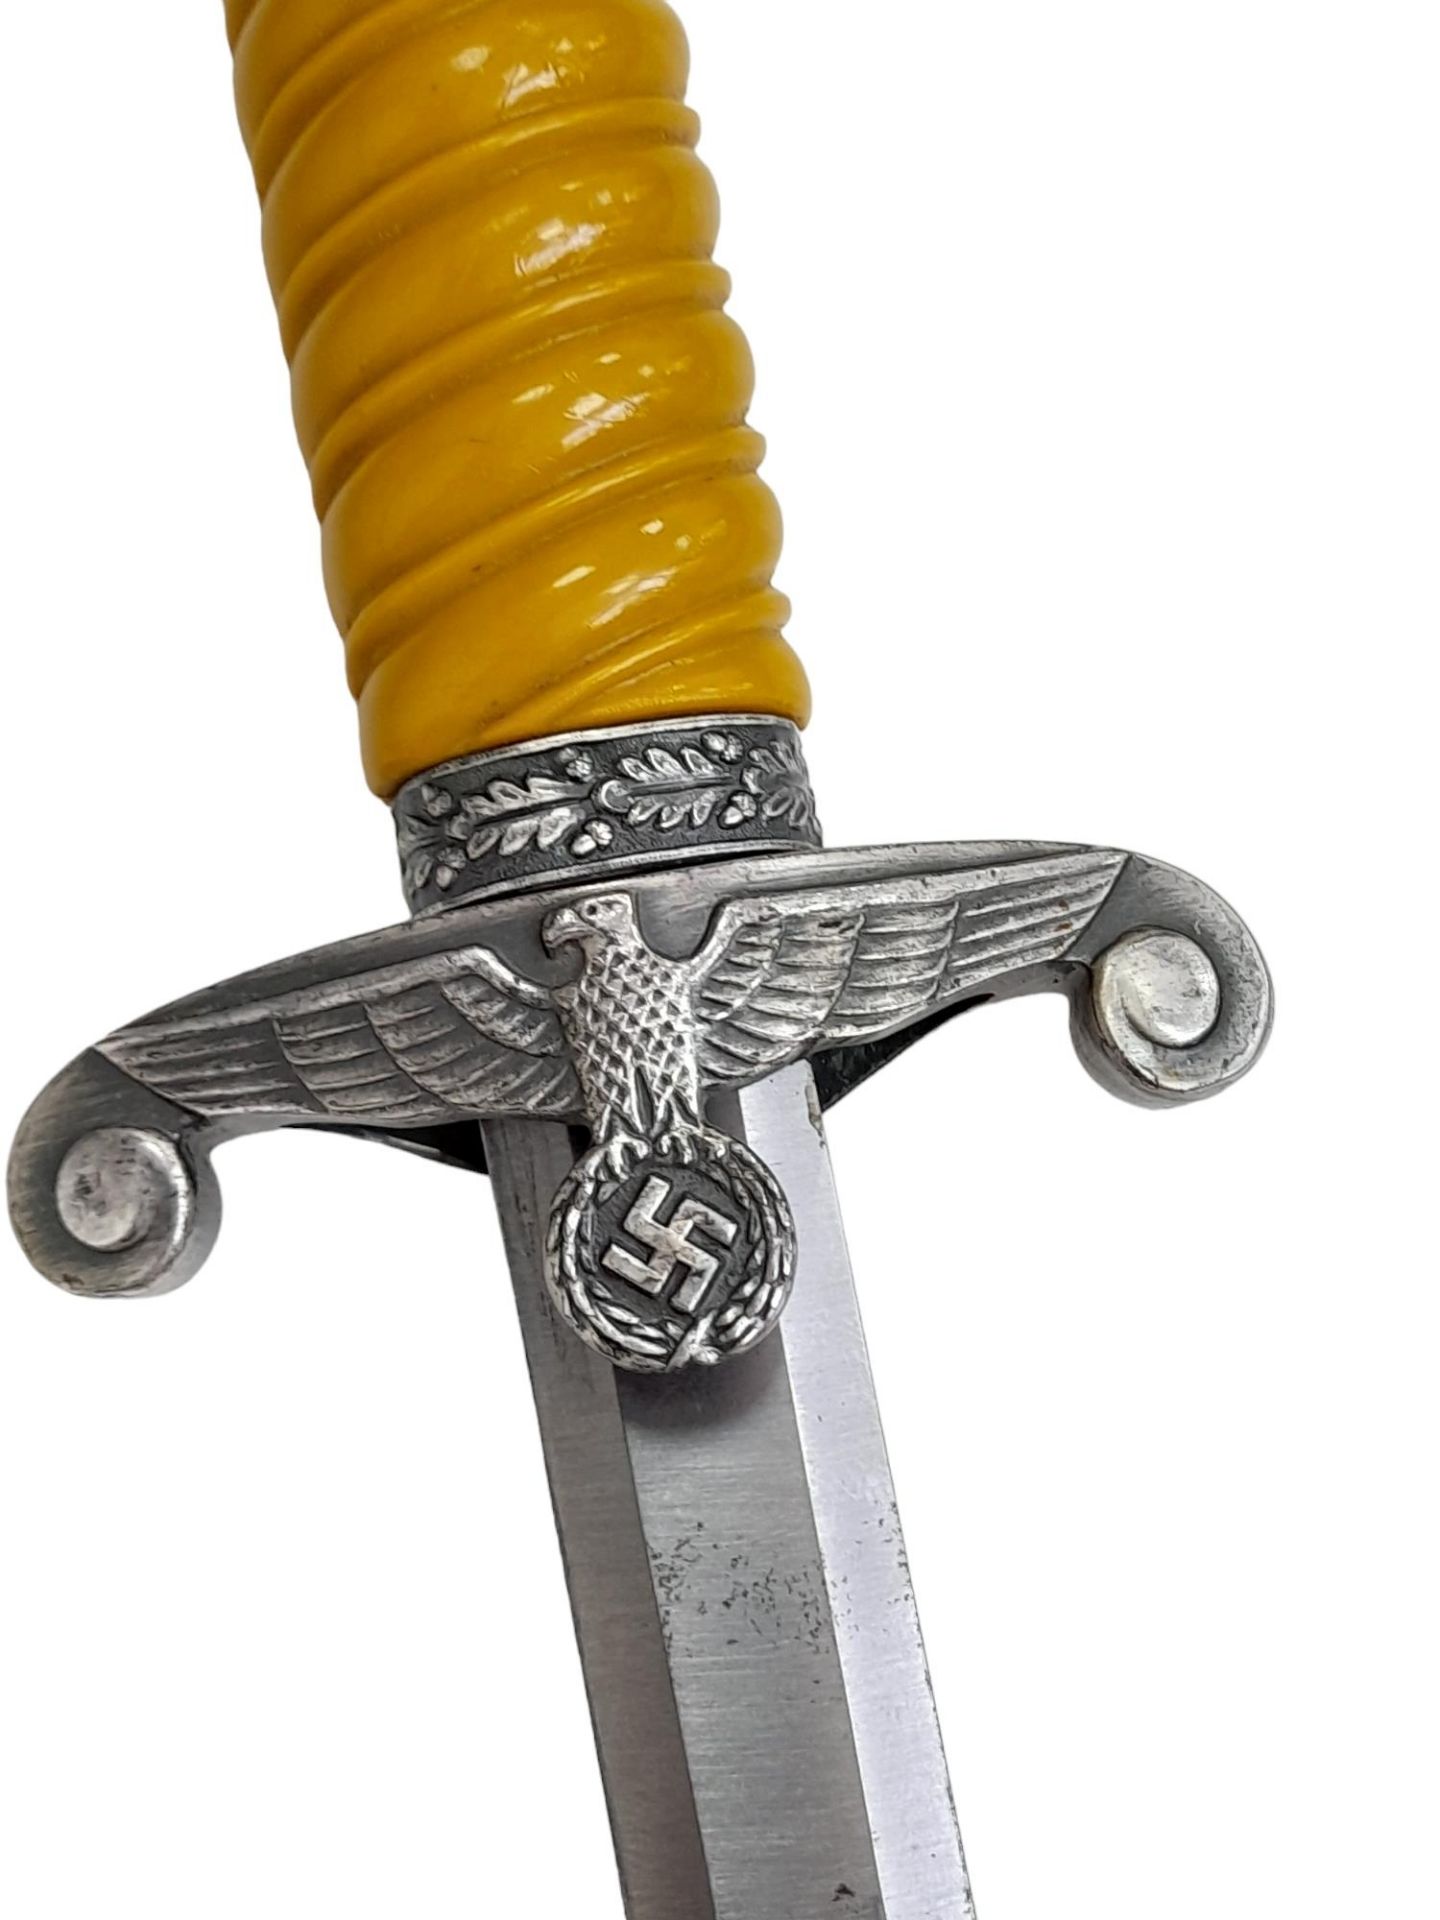 3rd Reich Army Dagger by Holler of Solingen. Nice crack free pumpkin coloured handle. Overall very - Image 4 of 5